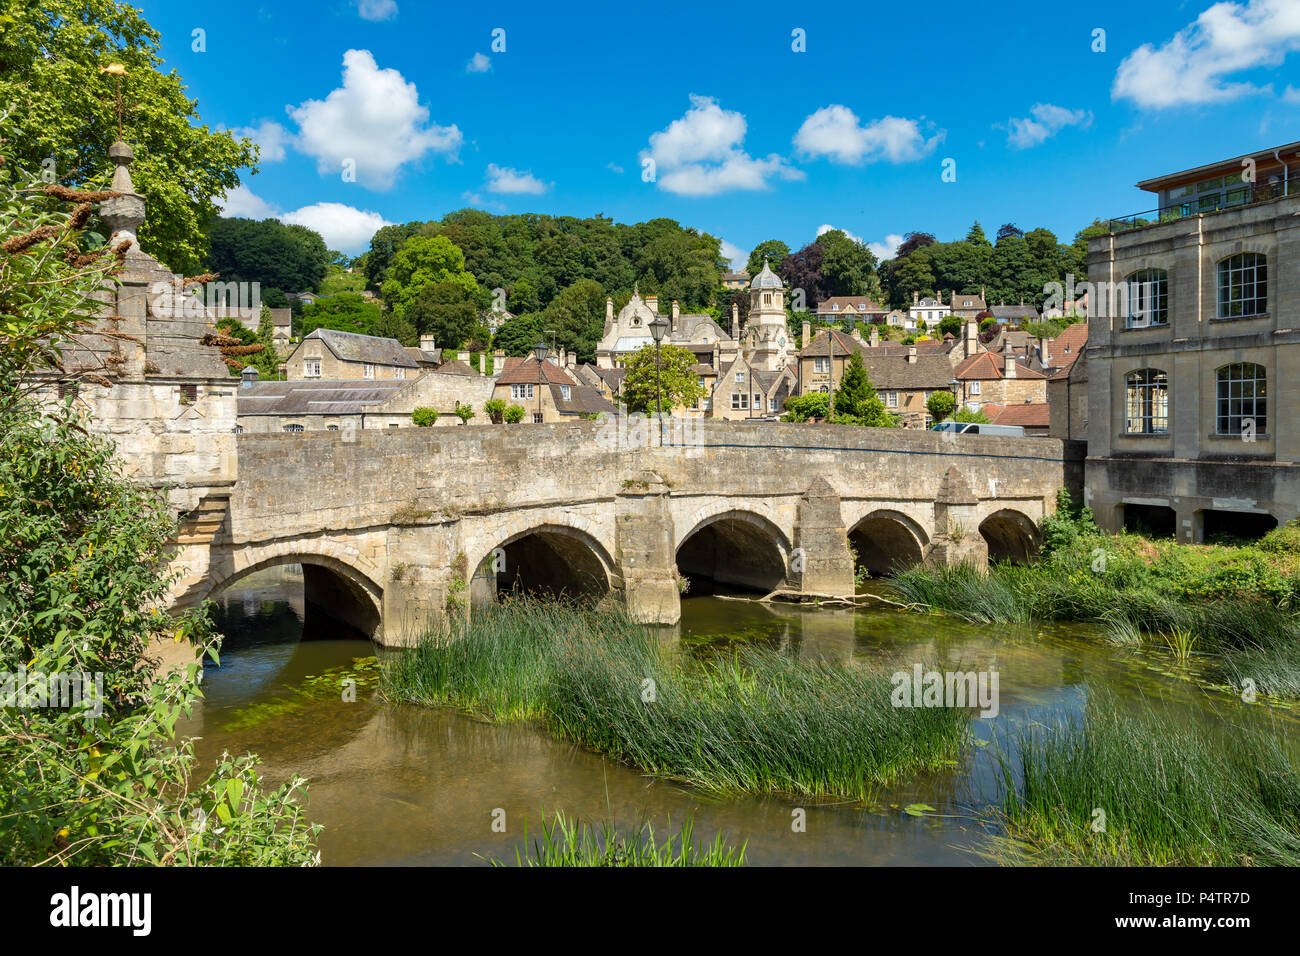 Bradford-on-Avon Wiltshire England June 22, 2018 View of Town Bridge, crossing the river Avon, with the town in the background Stock Photo